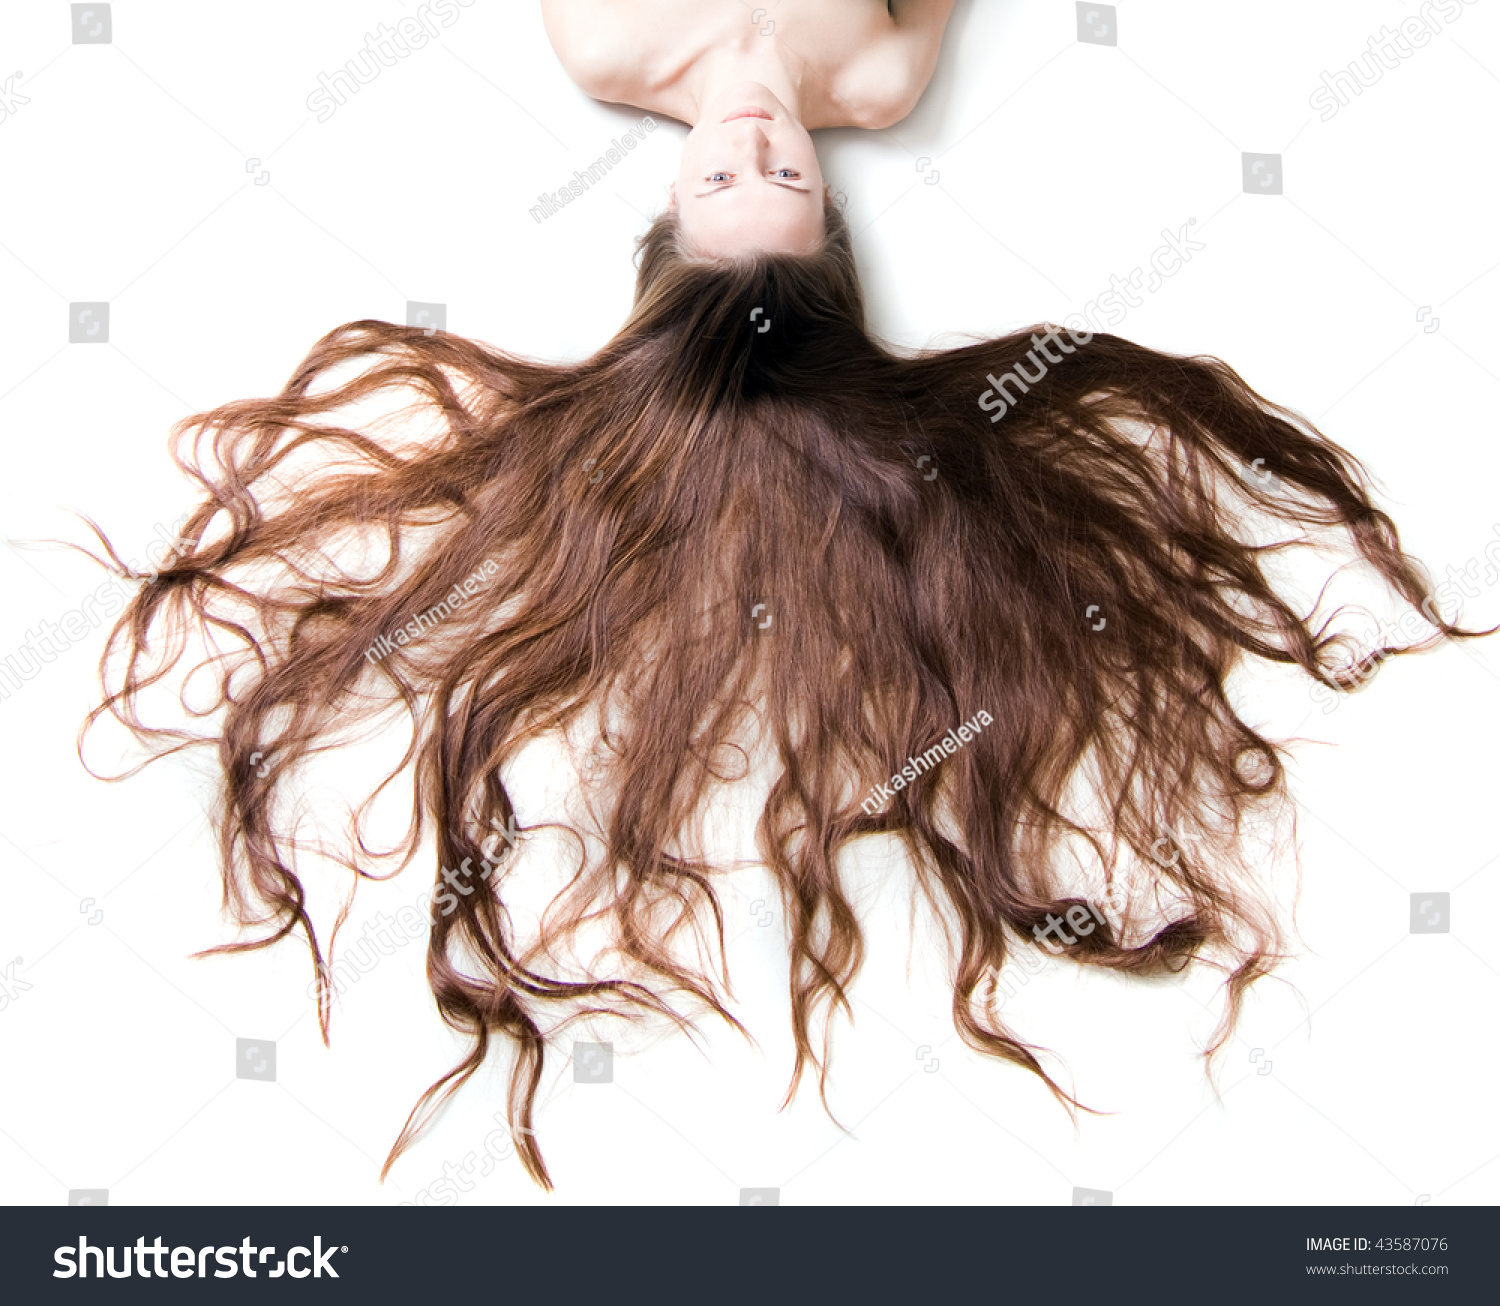 Naked Woman With A Long Brown Hair On A White Background Stock Photo